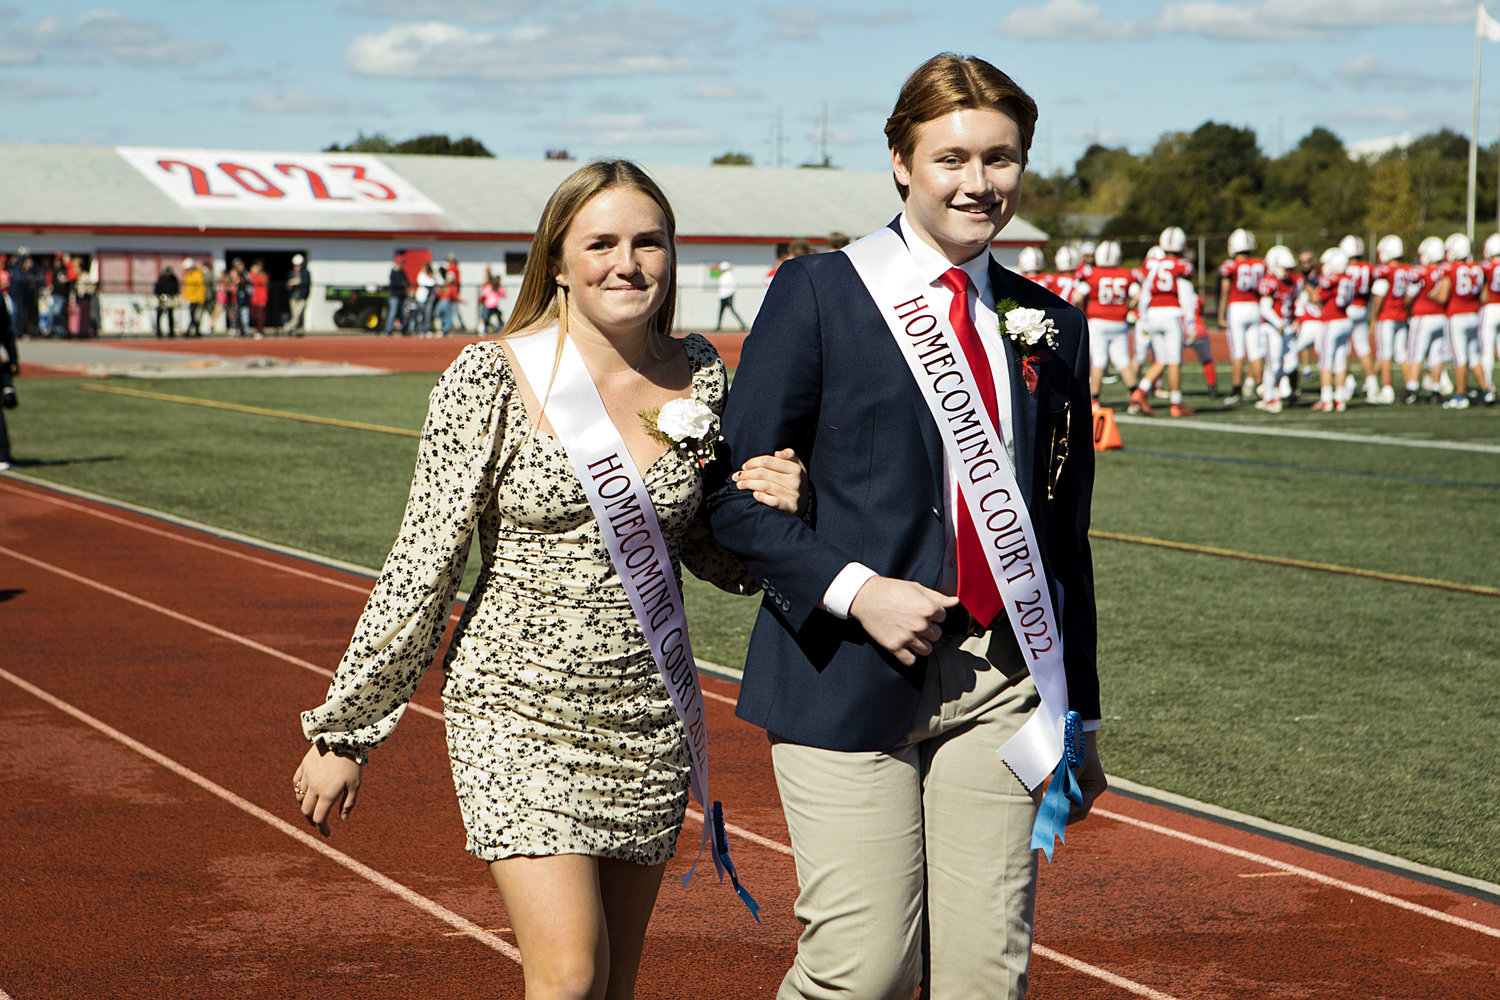 Jack Hollen escorts Elise Kirwin to the PHS turf field after the parade.